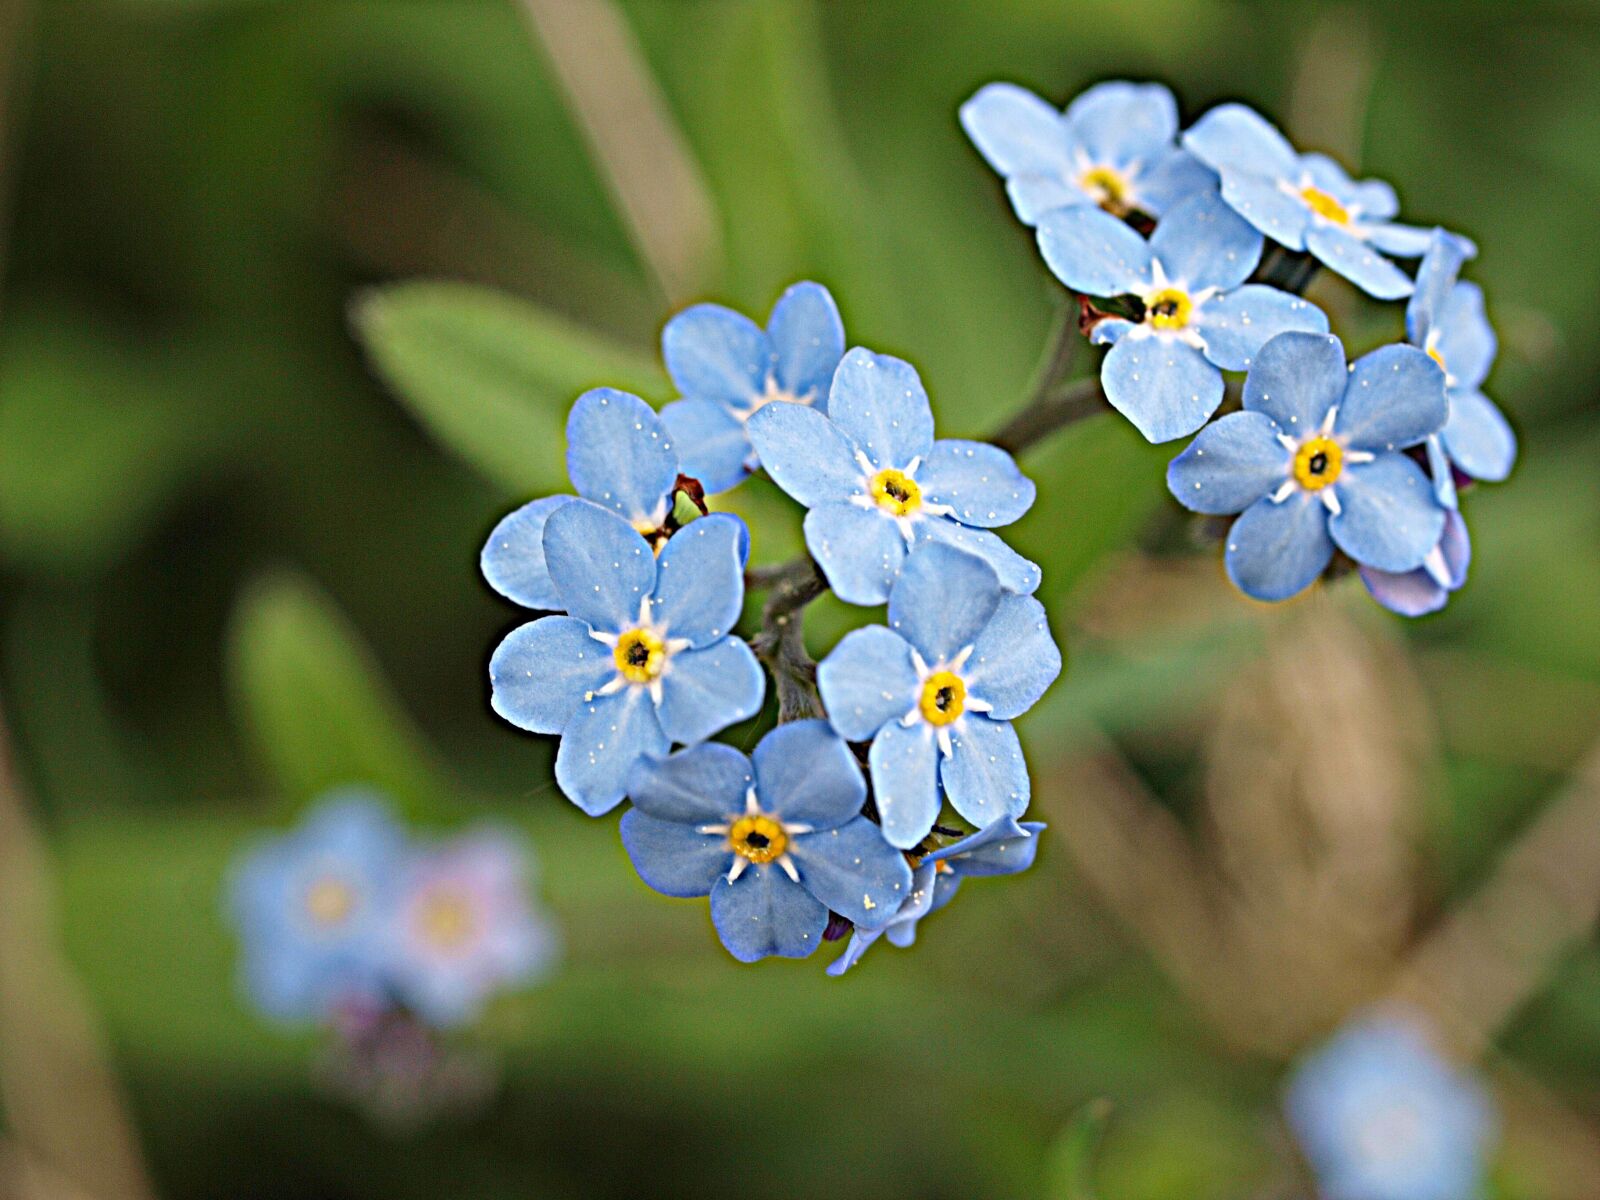 Olympus E-3 sample photo. Forget me not, flower photography